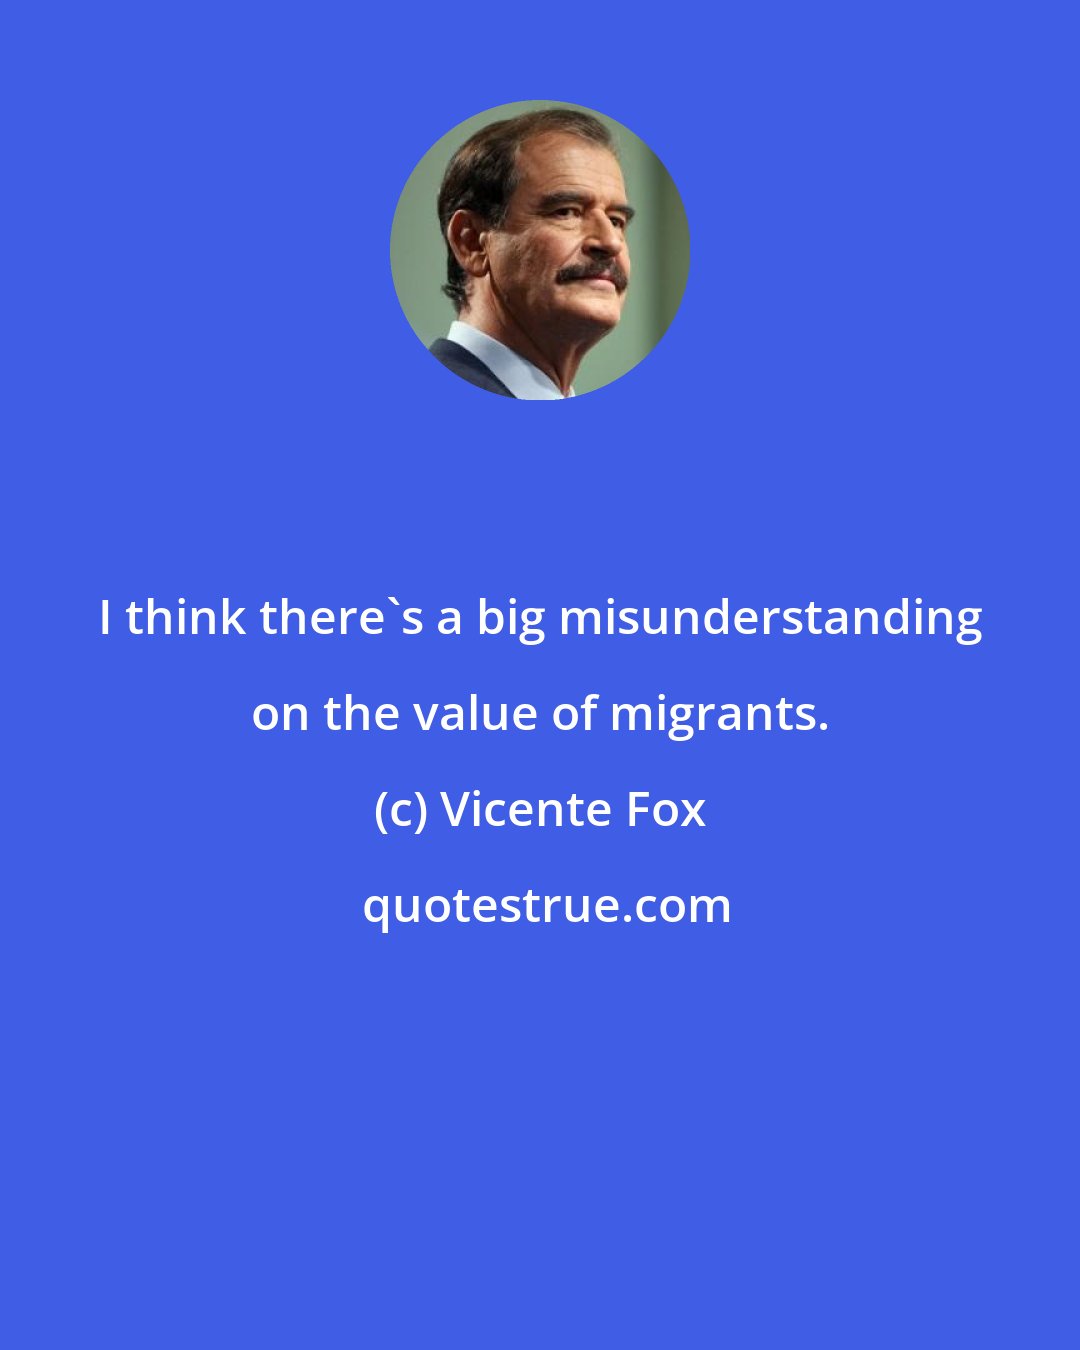 Vicente Fox: I think there's a big misunderstanding on the value of migrants.